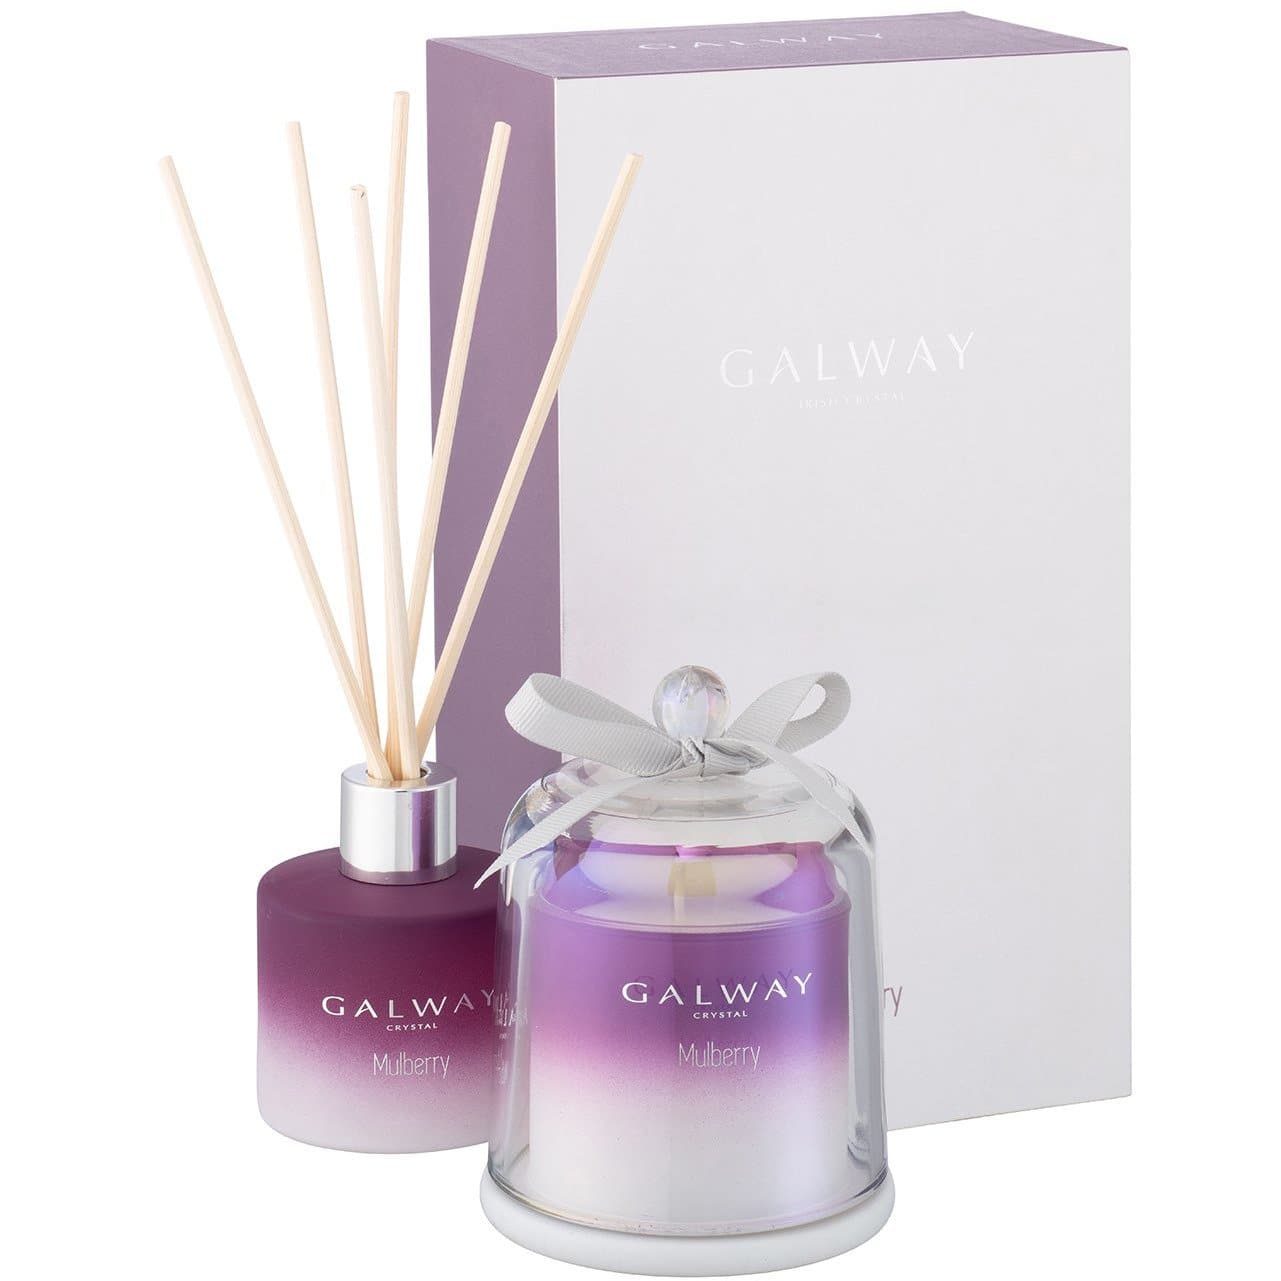 Galway Crystal Mulberry Gift Set